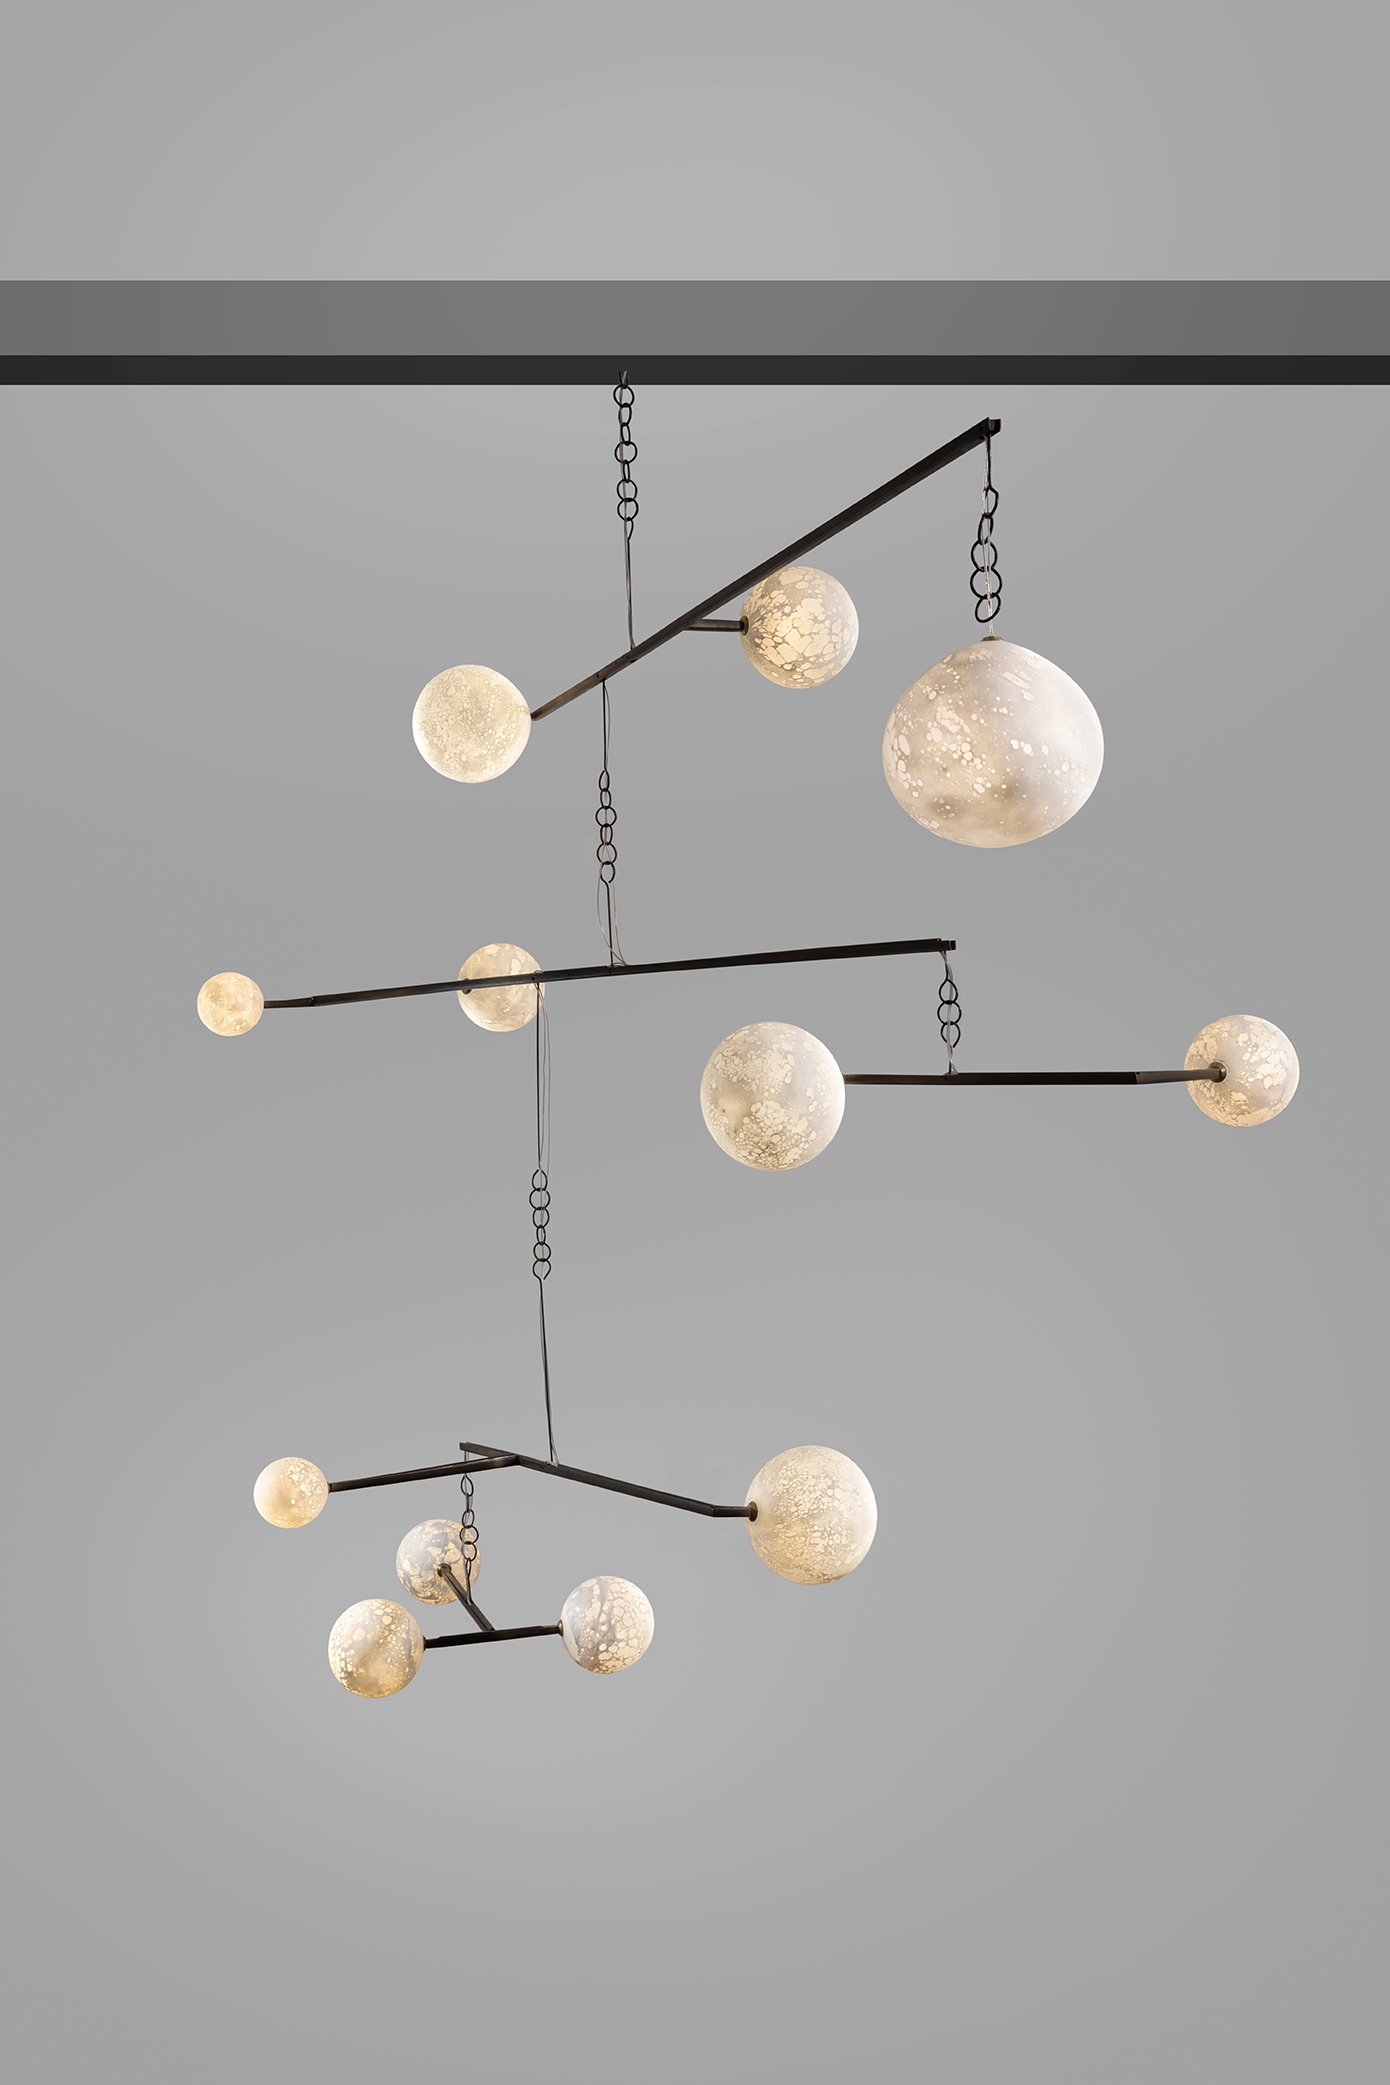 Mobile chandelier Angles 3-200x200x200cm